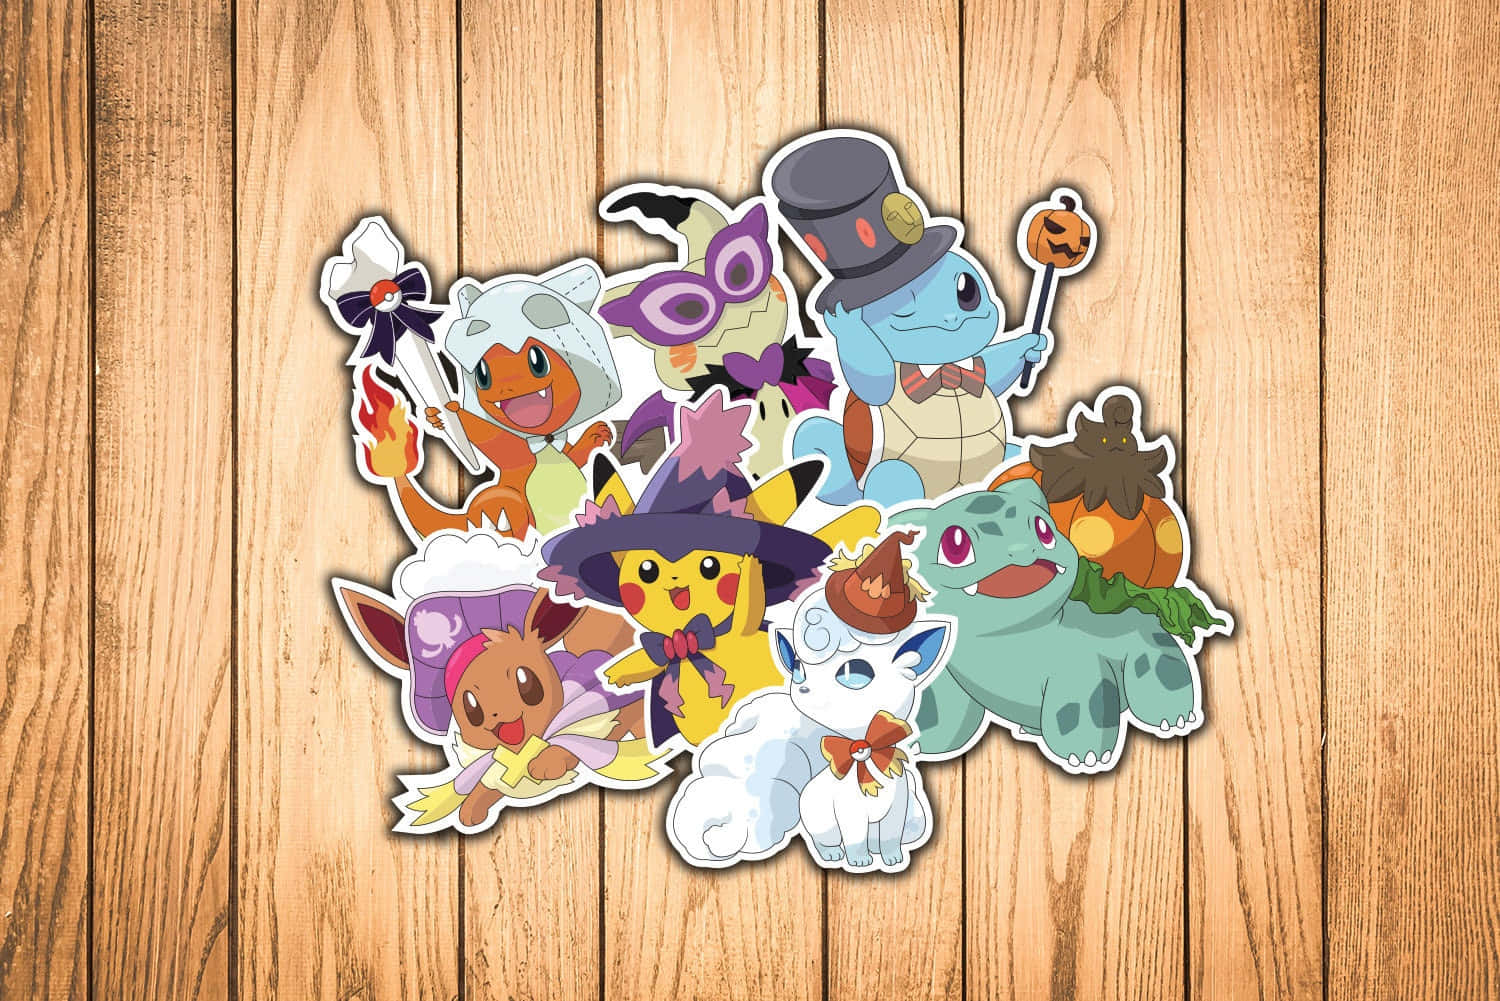 Celebrate Halloween with your favorite Pokémon characters! Wallpaper